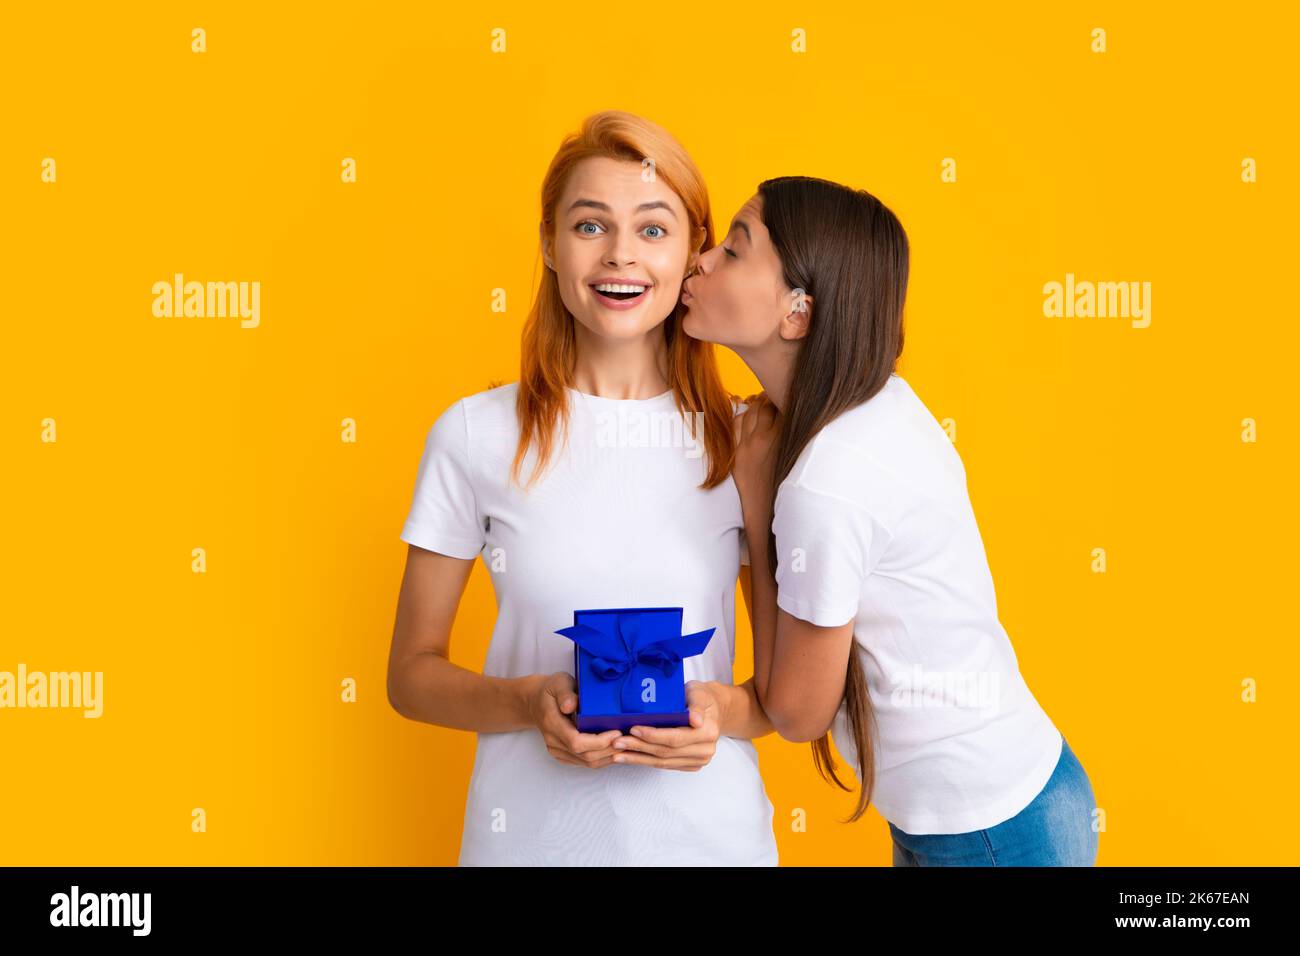 Child kissing mom. Mother and daughter with present gift. Teenager girl giving gift box to her mother on yellow background. Stock Photo